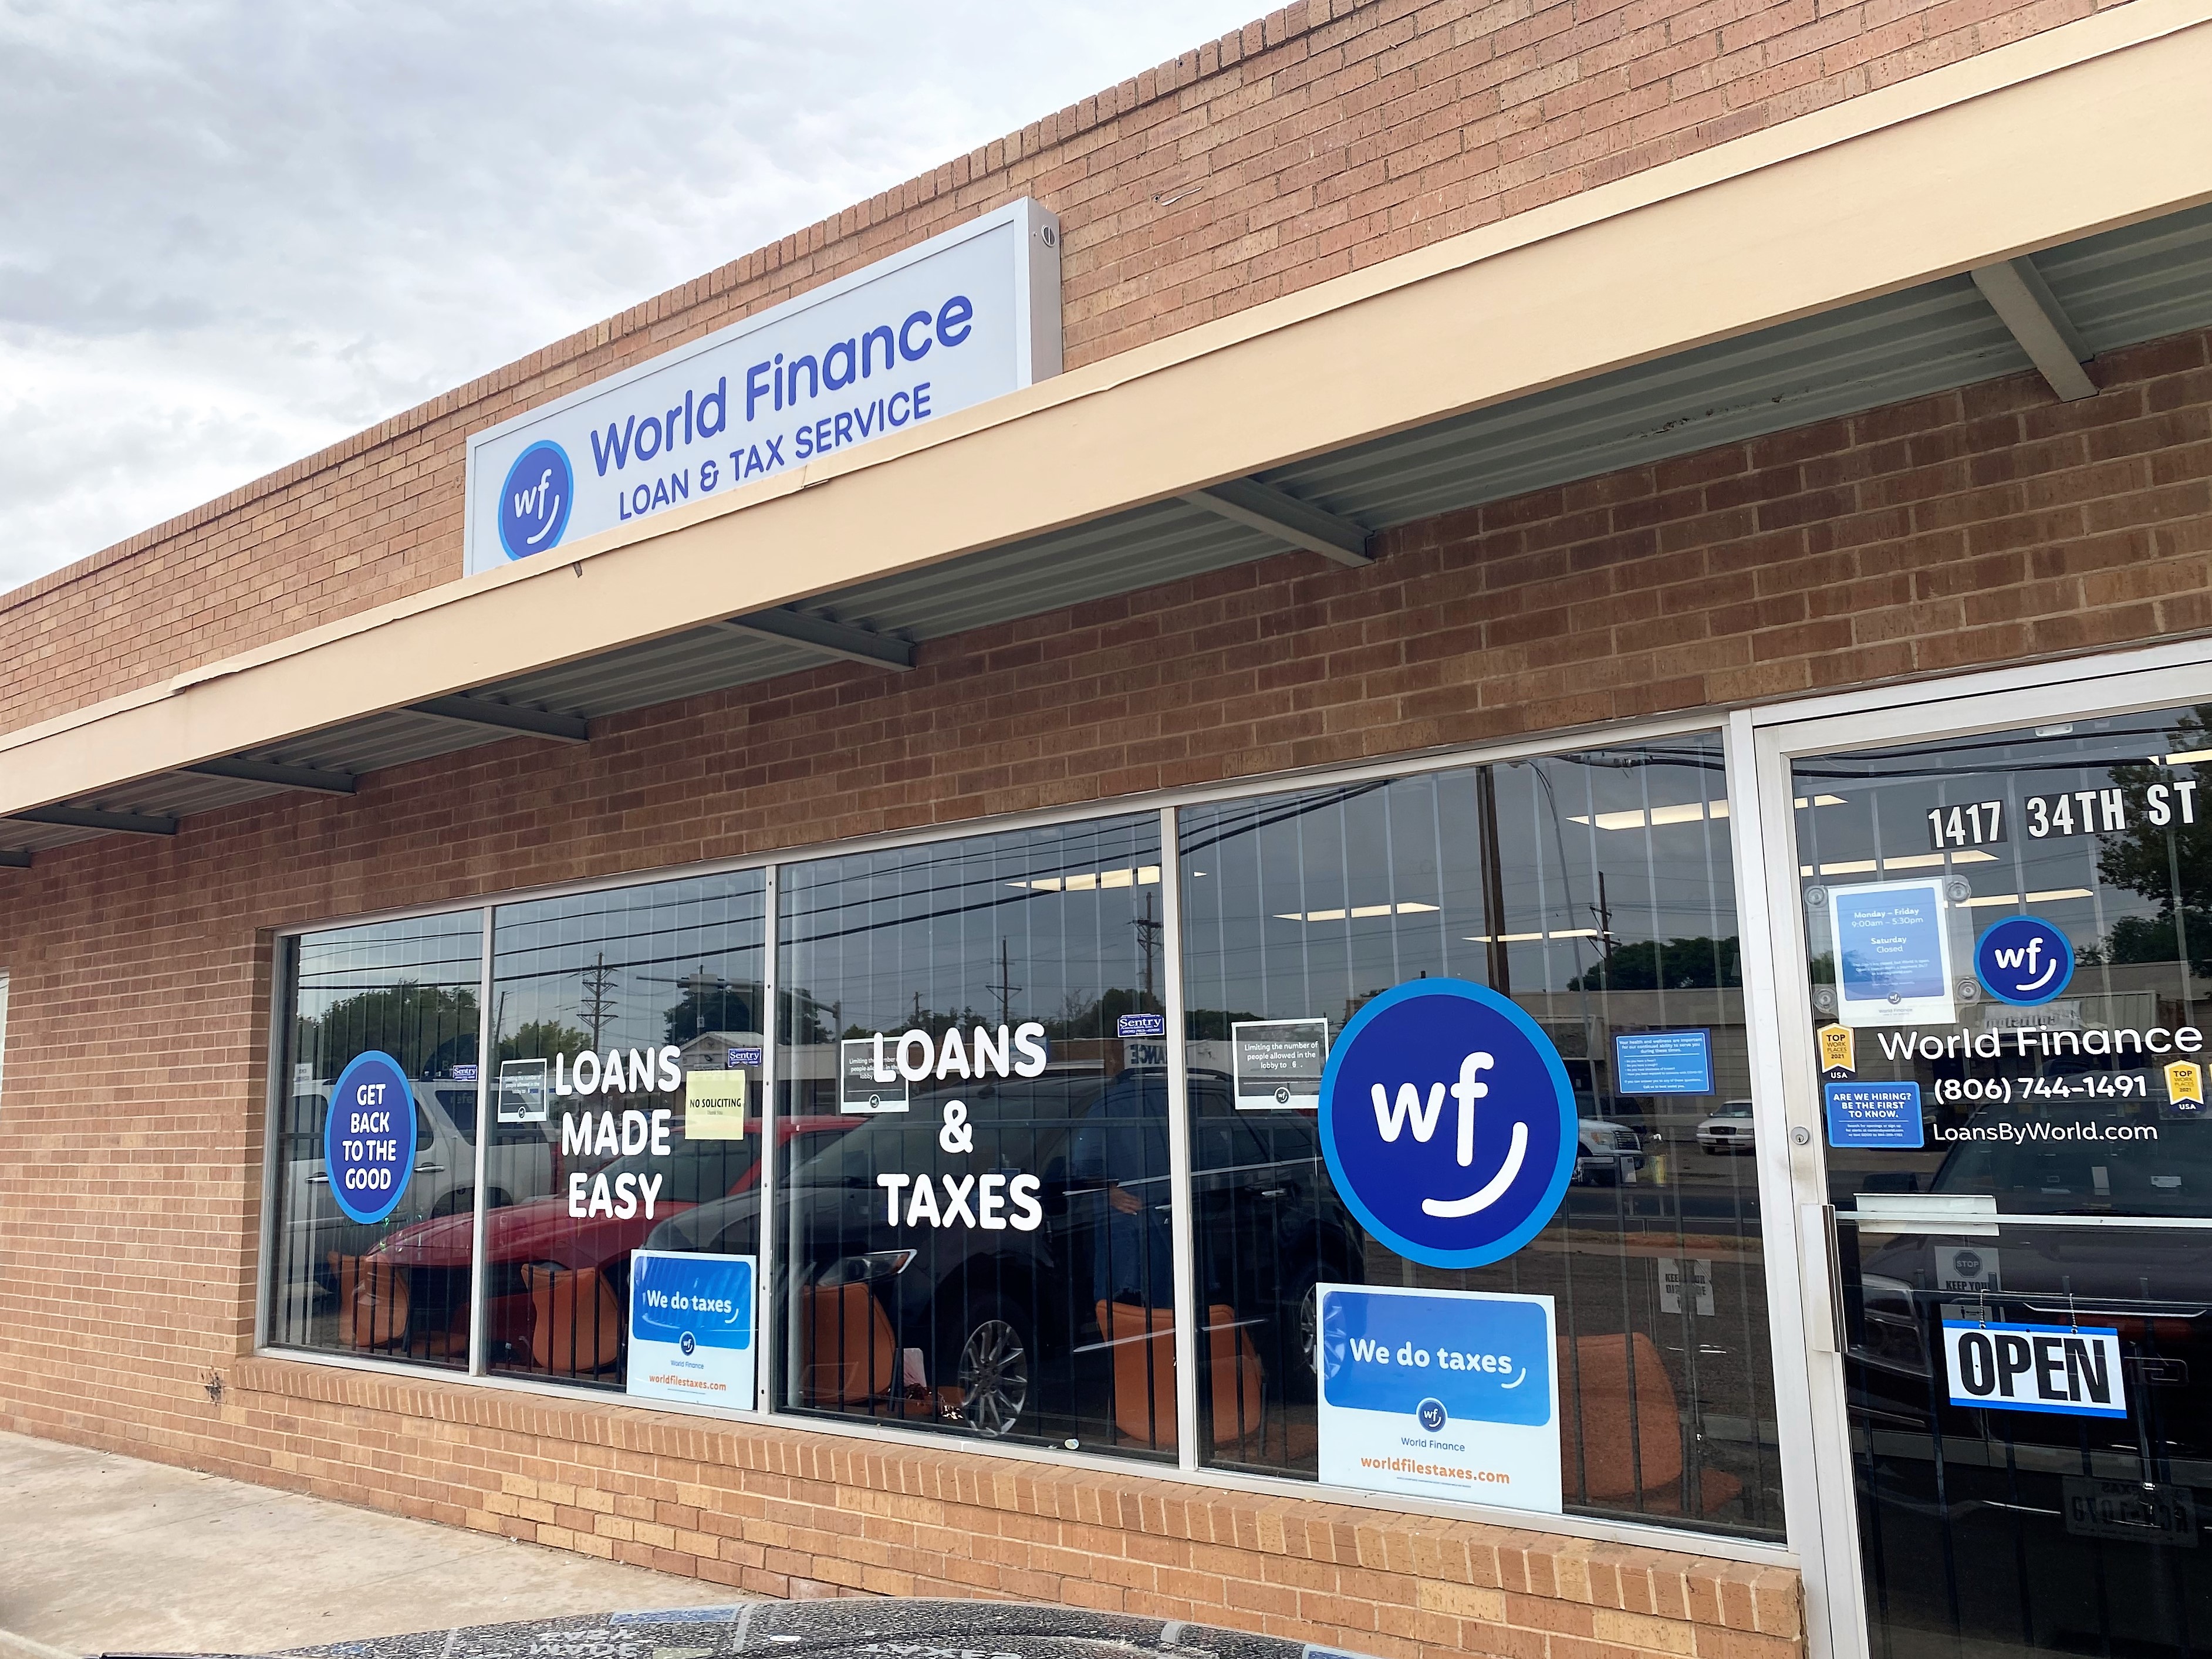 Front of Branch - angle view World Finance Lubbock (806)744-1491